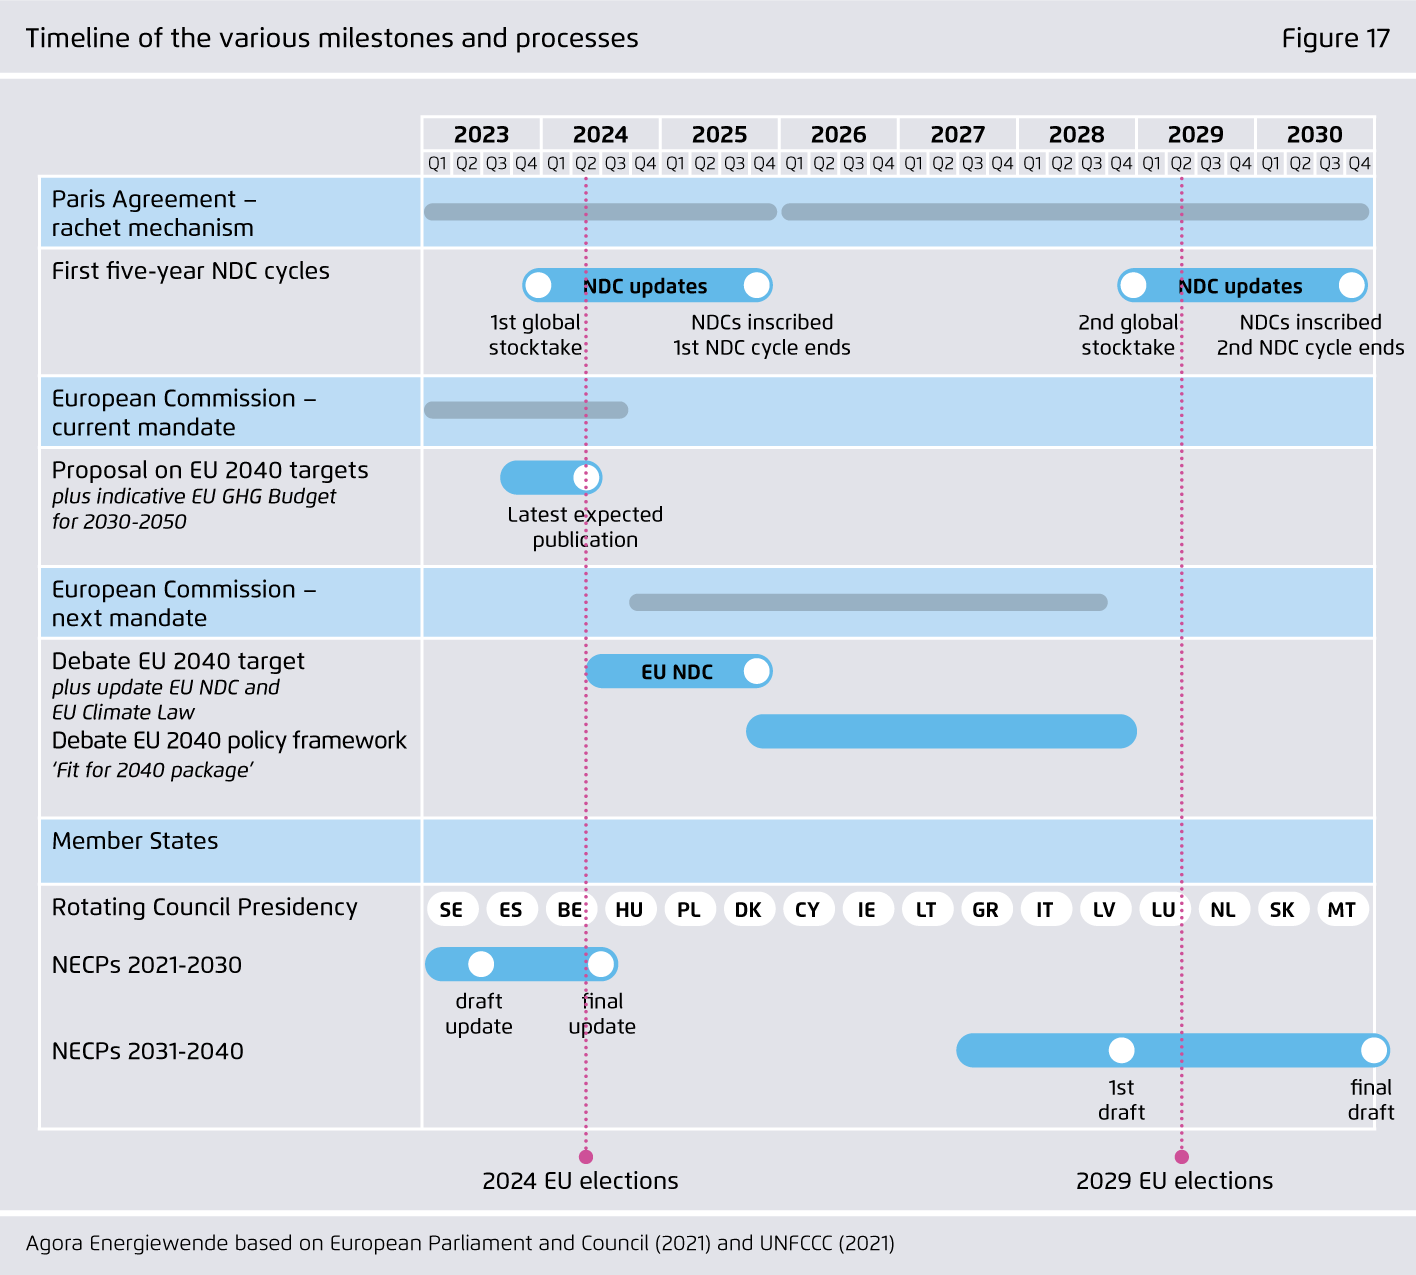 Preview for Timeline of the various milestones and processes